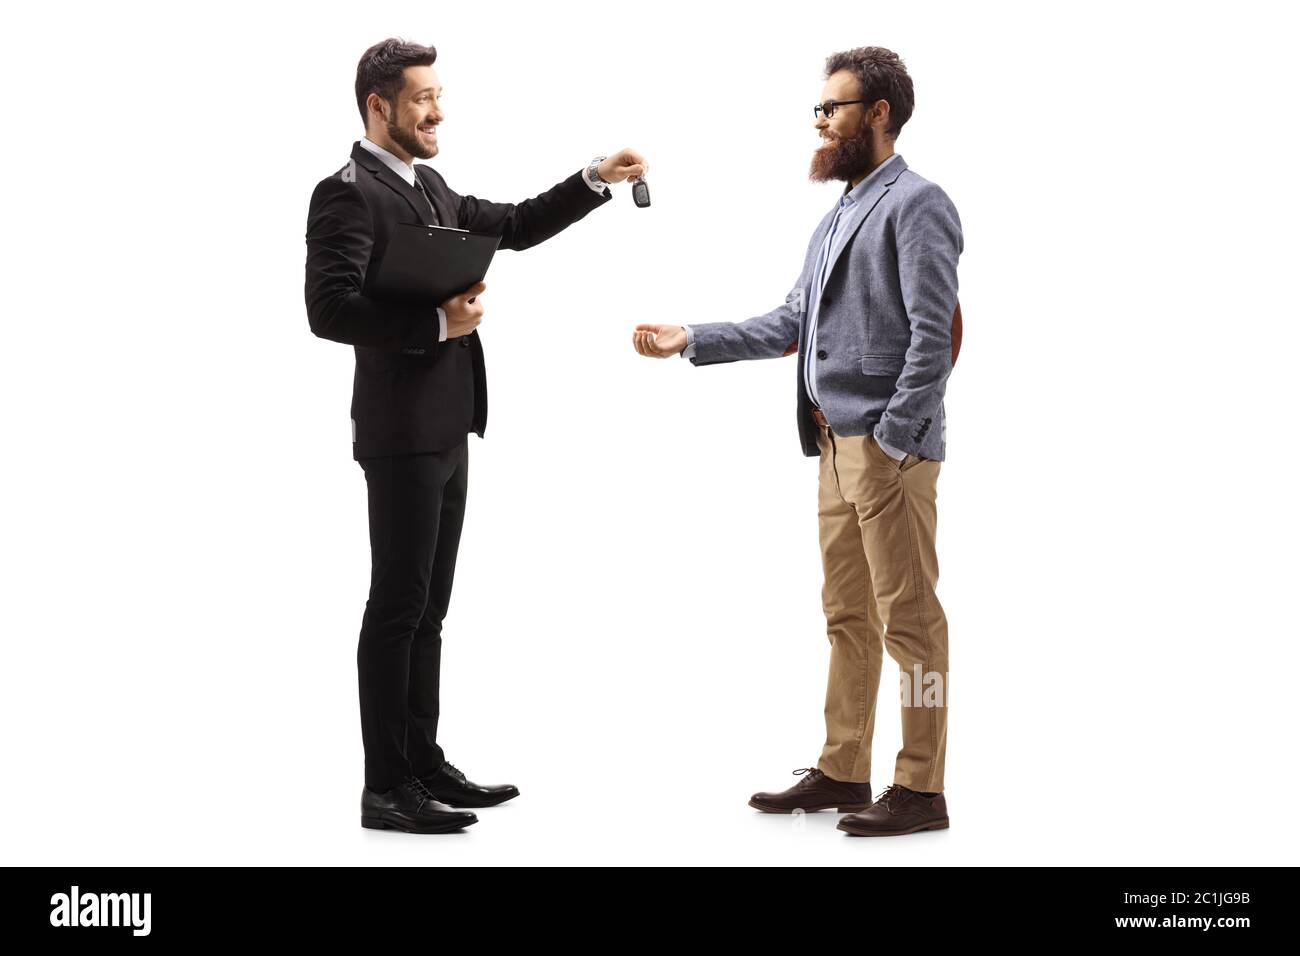 Full length profile shot of a businessman giving car keys to a smiling bearded man isolated on white background Stock Photo